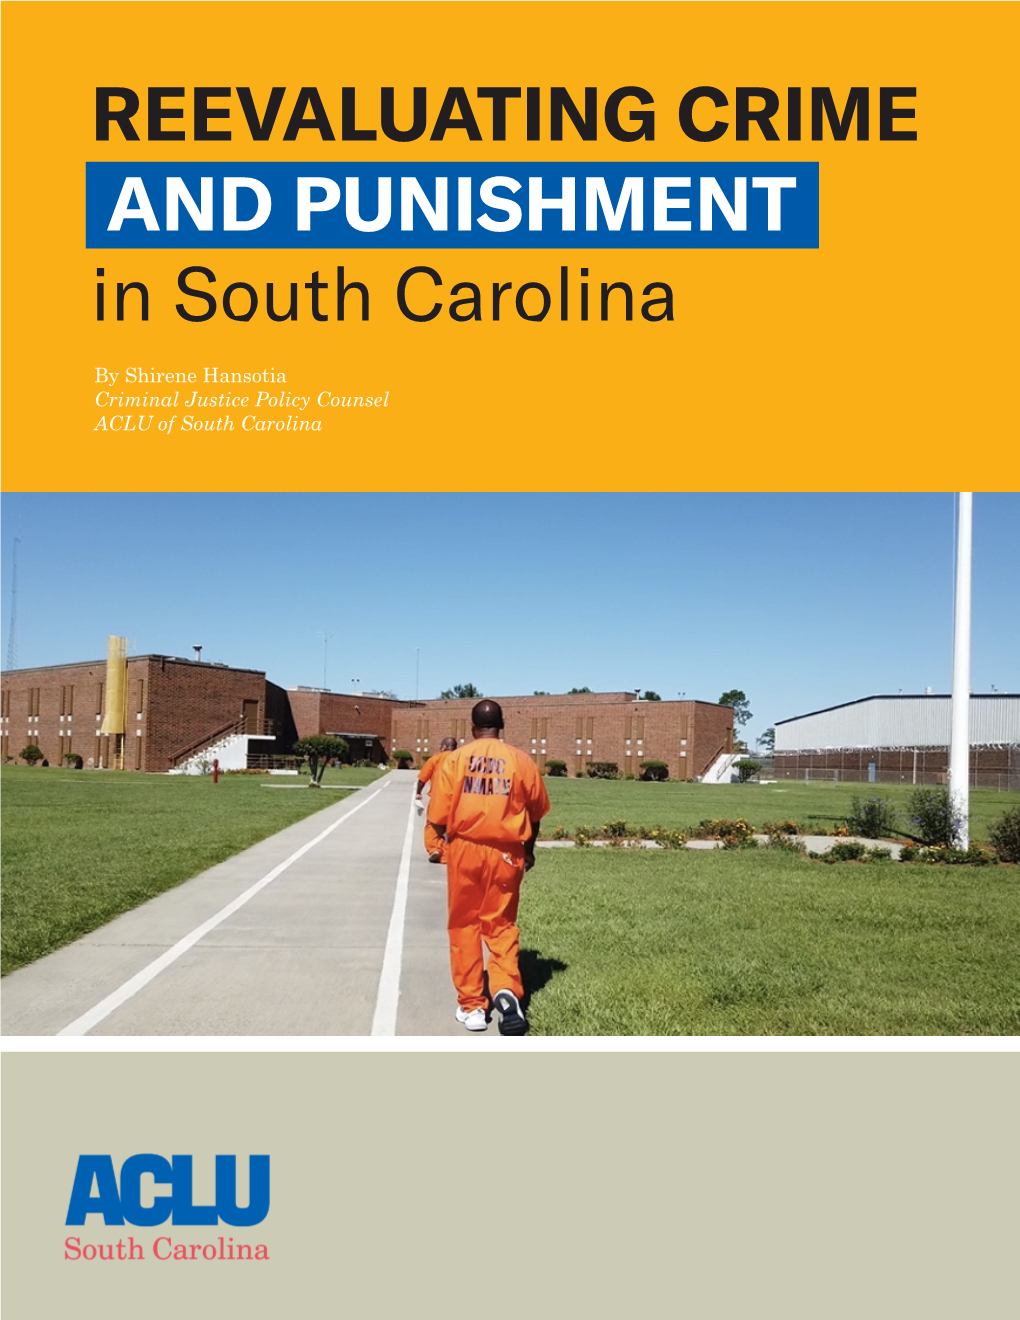 REEVALUATING CRIME and PUNISHMENT in South Carolina